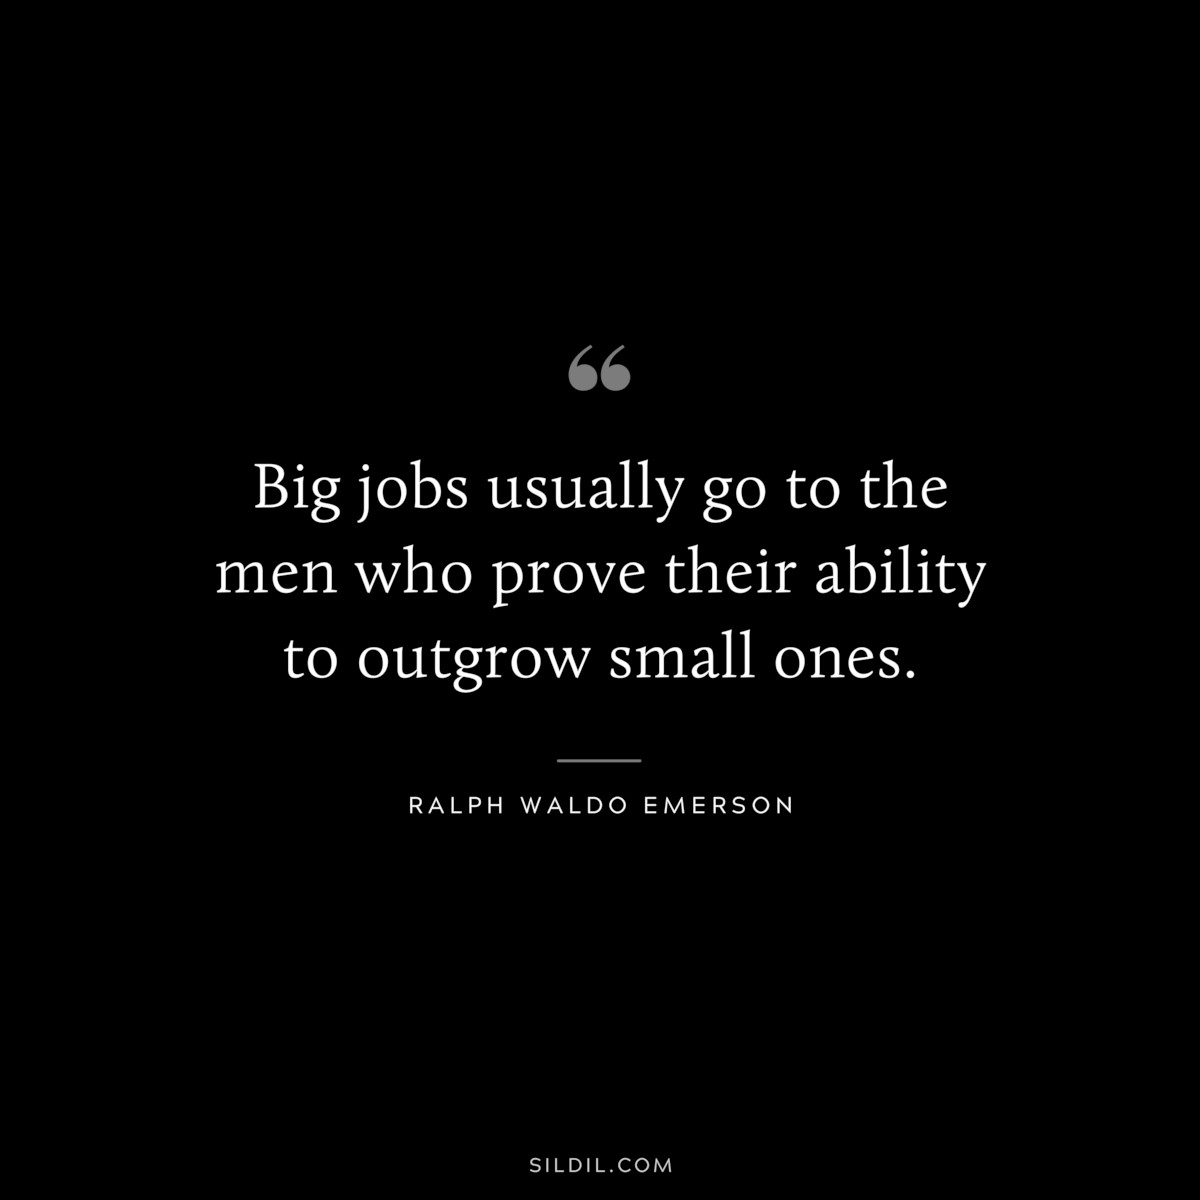 Big jobs usually go to the men who prove their ability to outgrow small ones. — Ralph Waldo Emerson